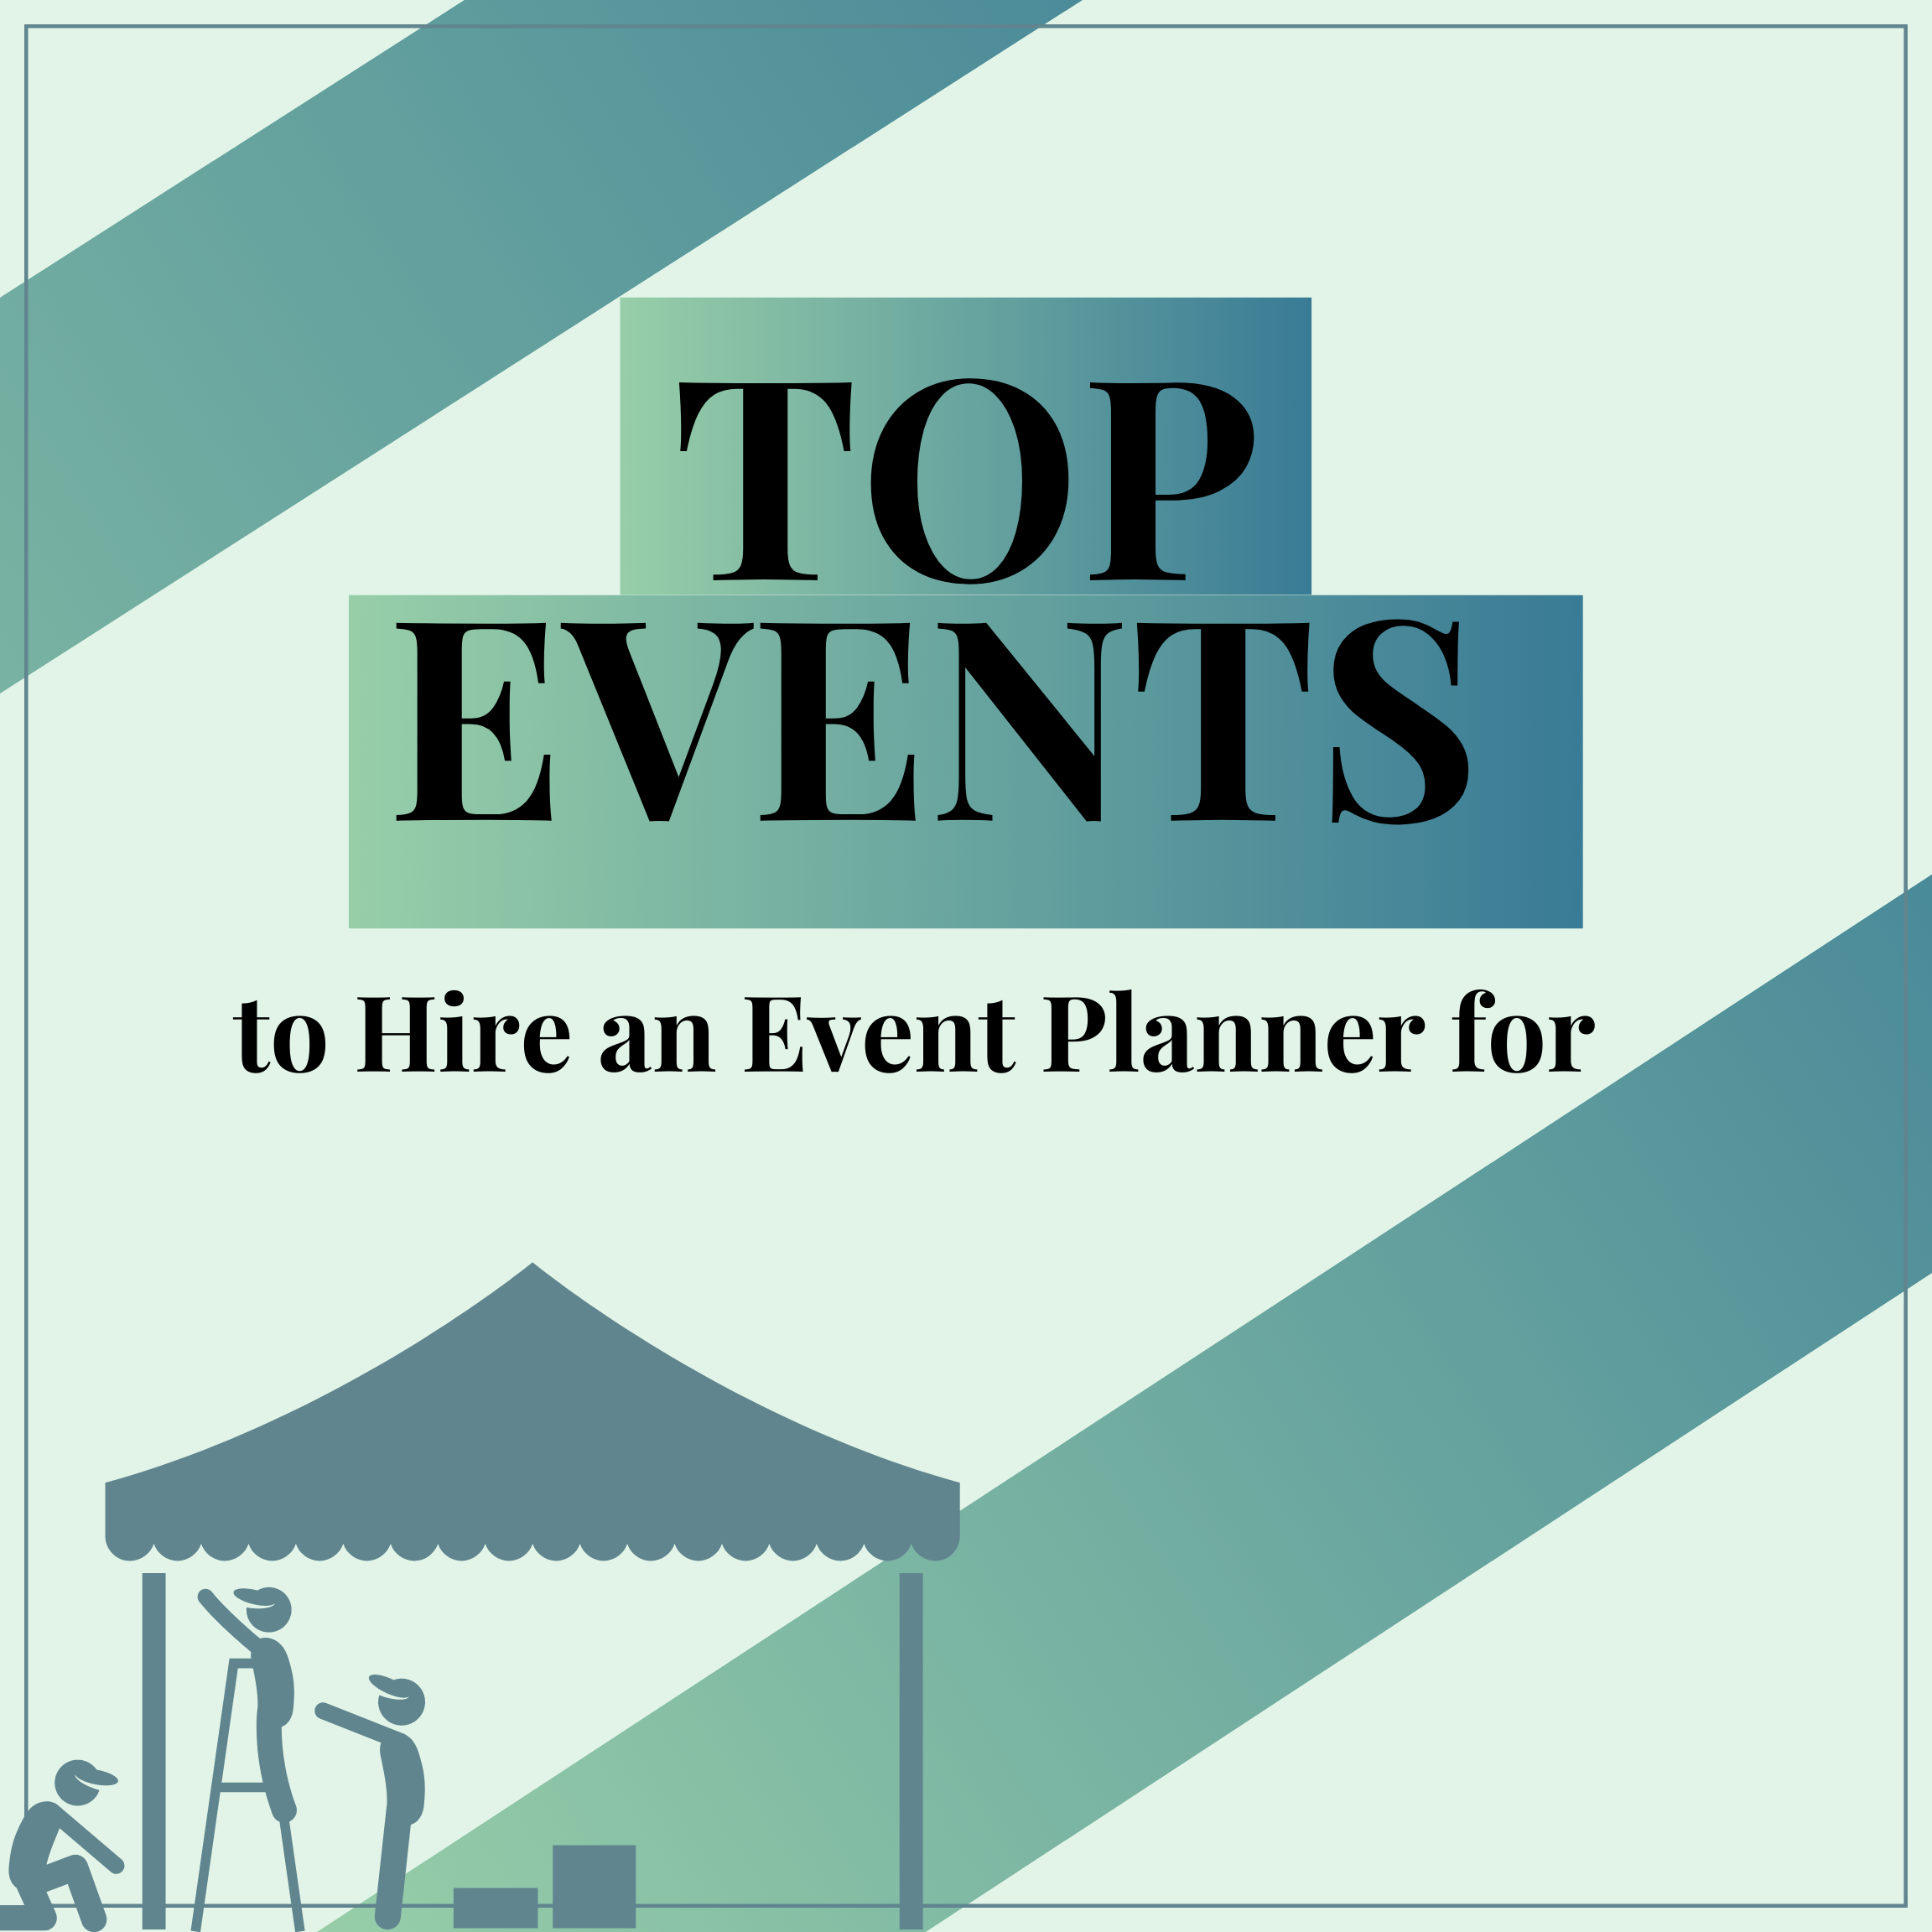 Top Events to Hire an Event Planner for